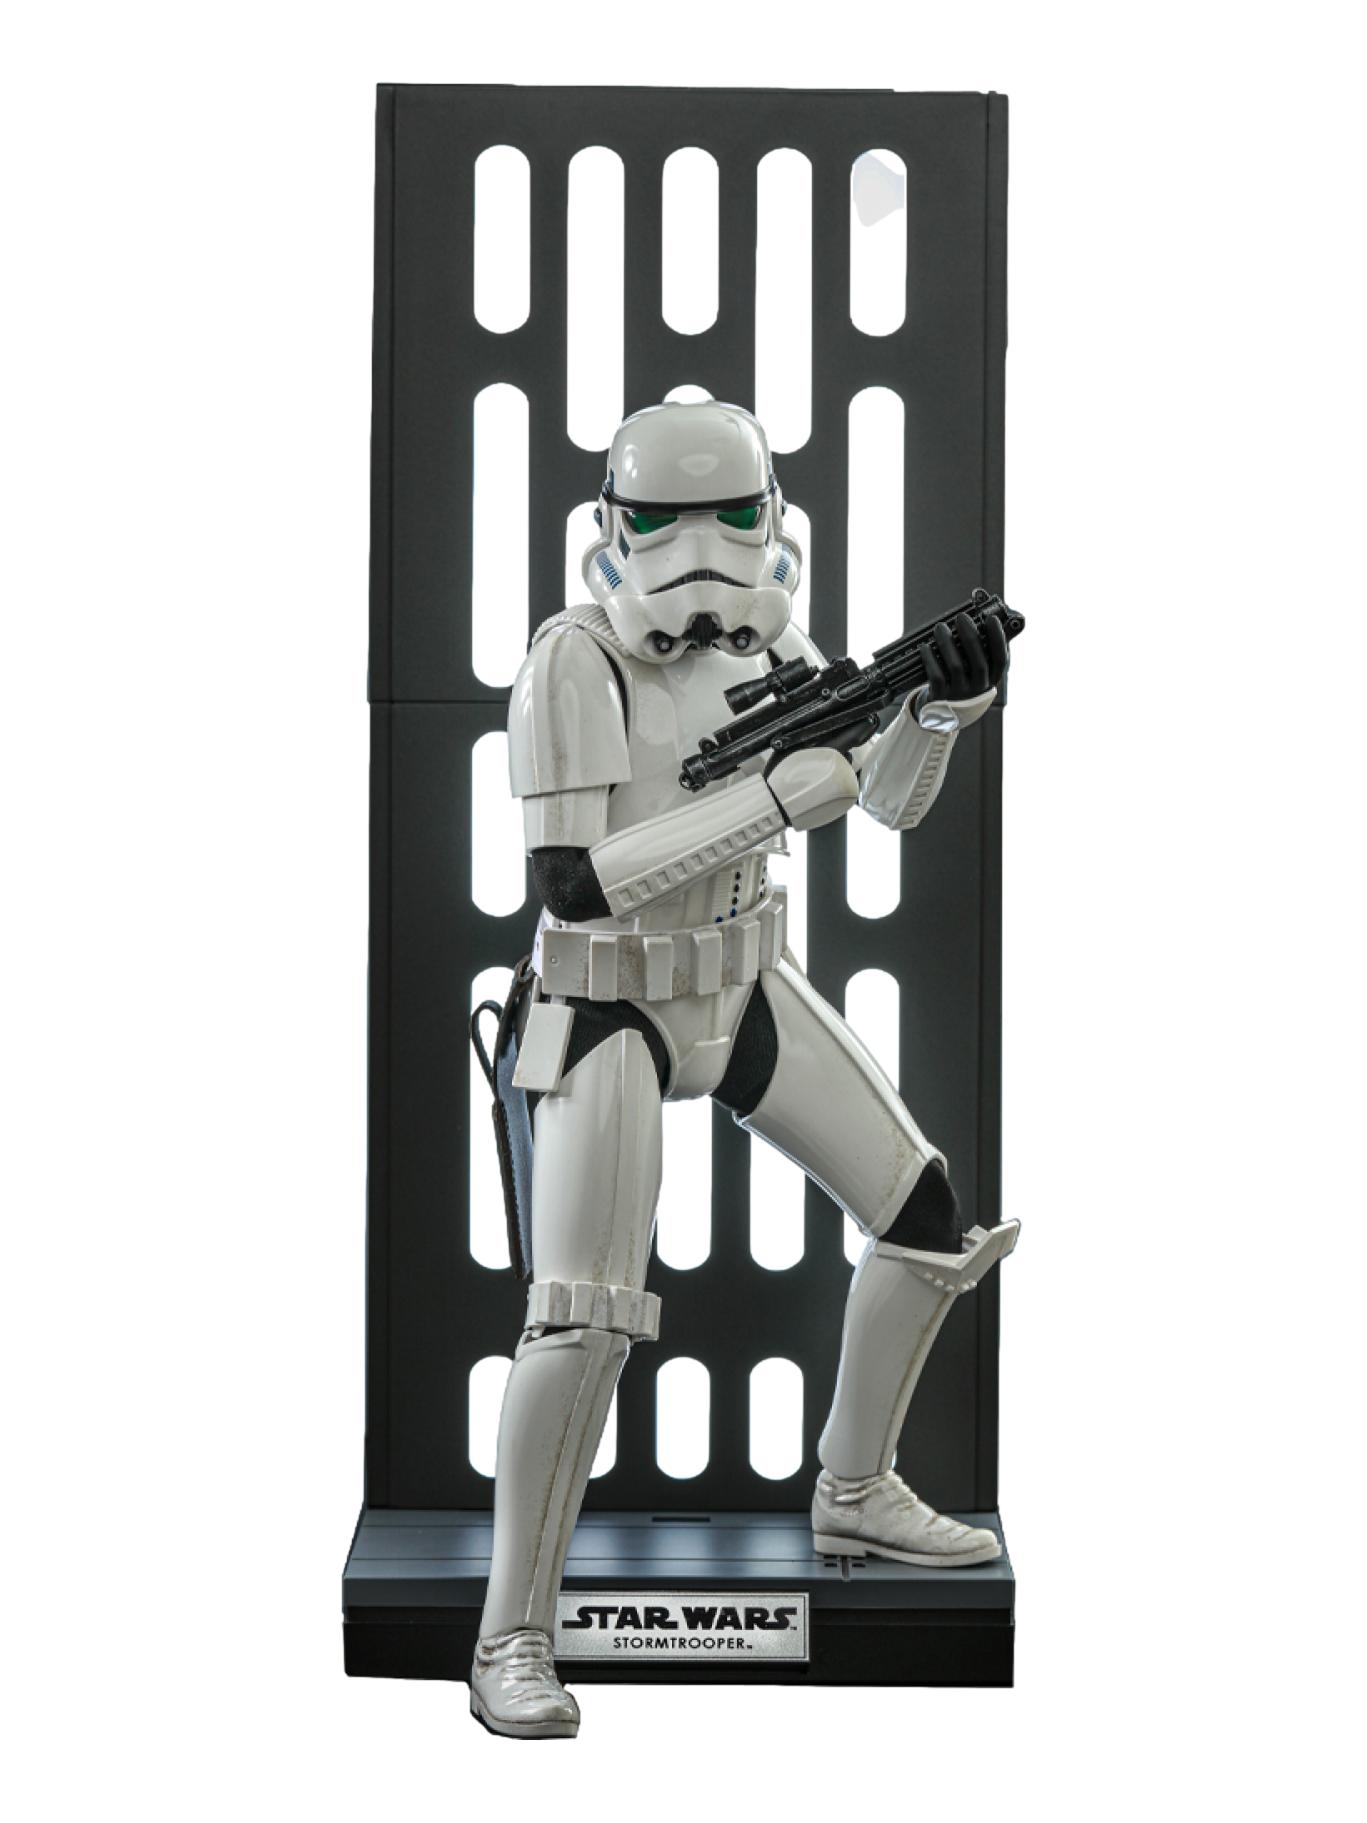 Star Wars: Stromtrooper with Death Star Enviroment: Sixth Scale Hot Toys